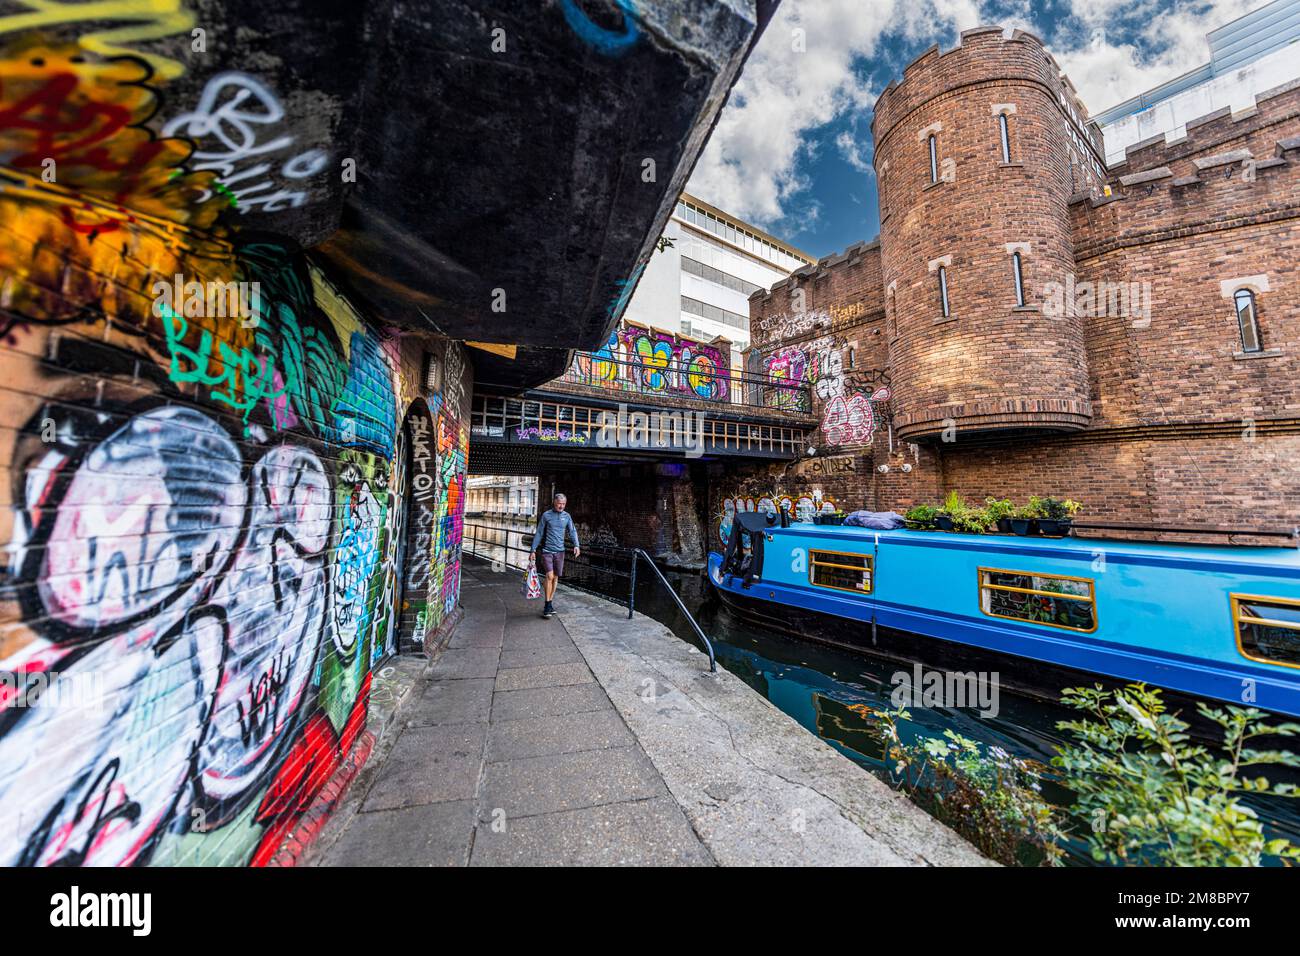 Pirate Castle, Regents Canal, Camden Stock Photo